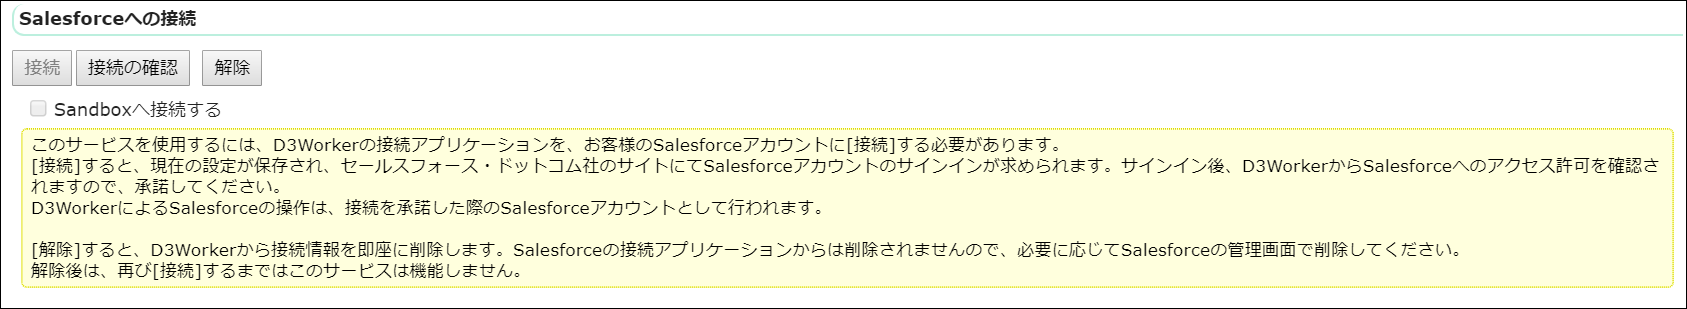 connection_to_salesforce.PNG